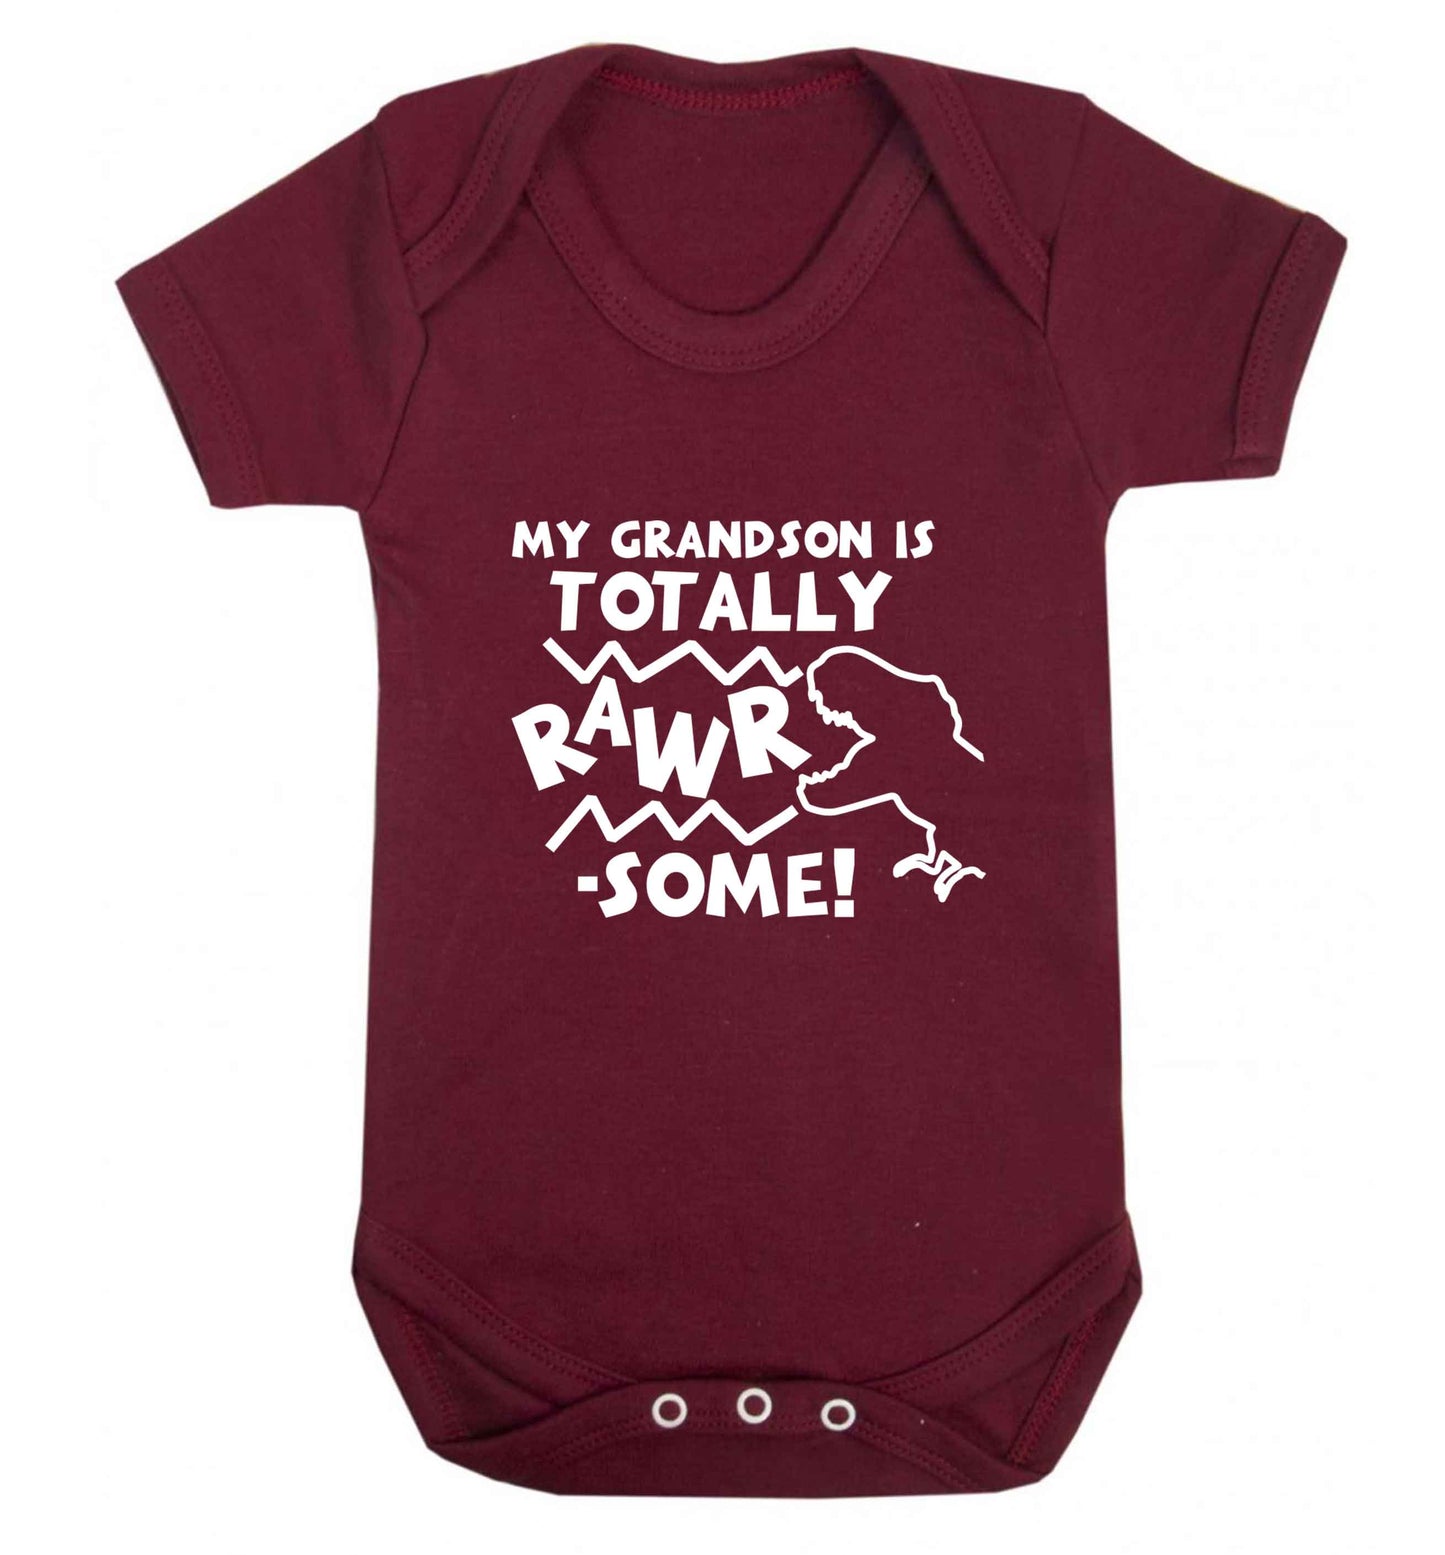 My grandson is totally rawrsome baby vest maroon 18-24 months